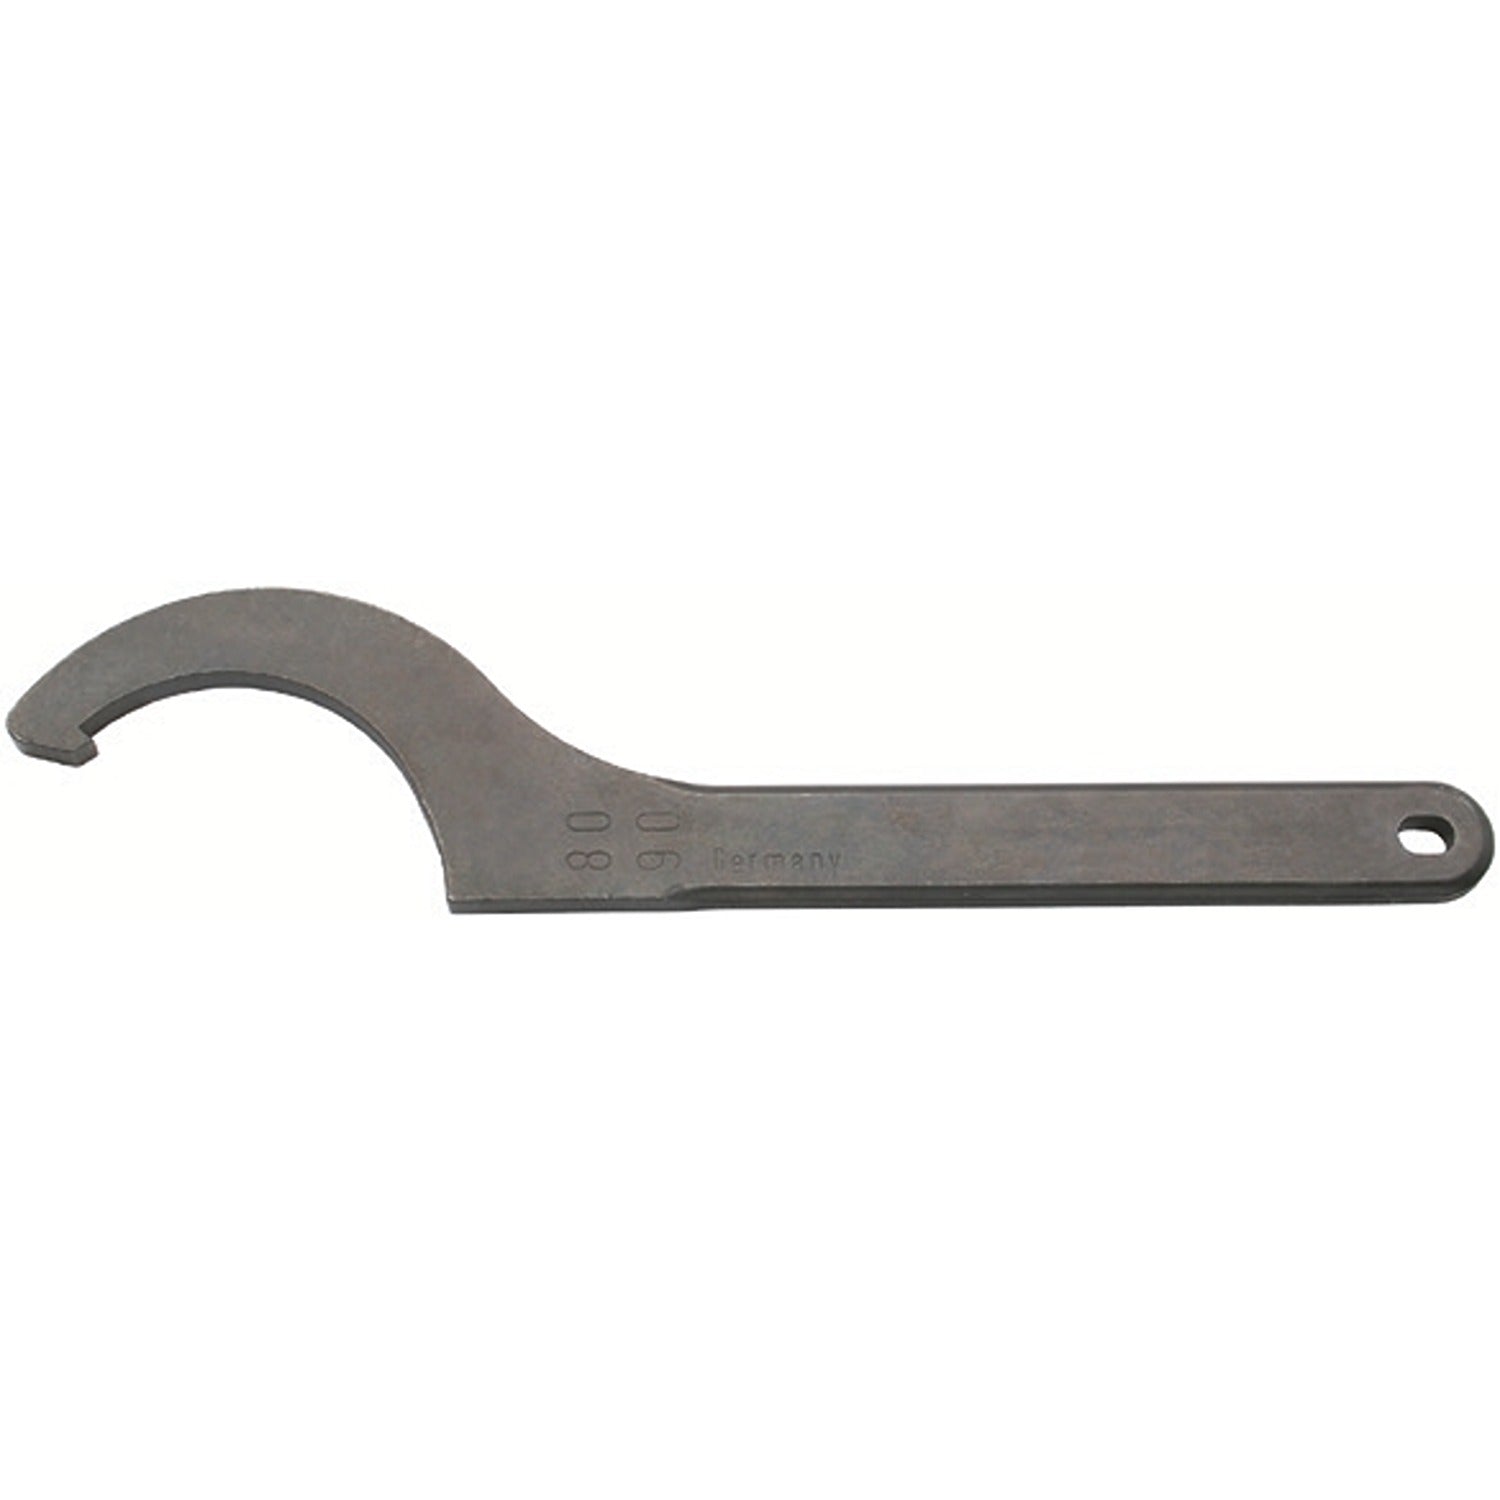 ELORA 890-180/205 Hook Wrench With Nose 470mm (ELORA Tools) - Premium Hook Wrench from ELORA - Shop now at Yew Aik.